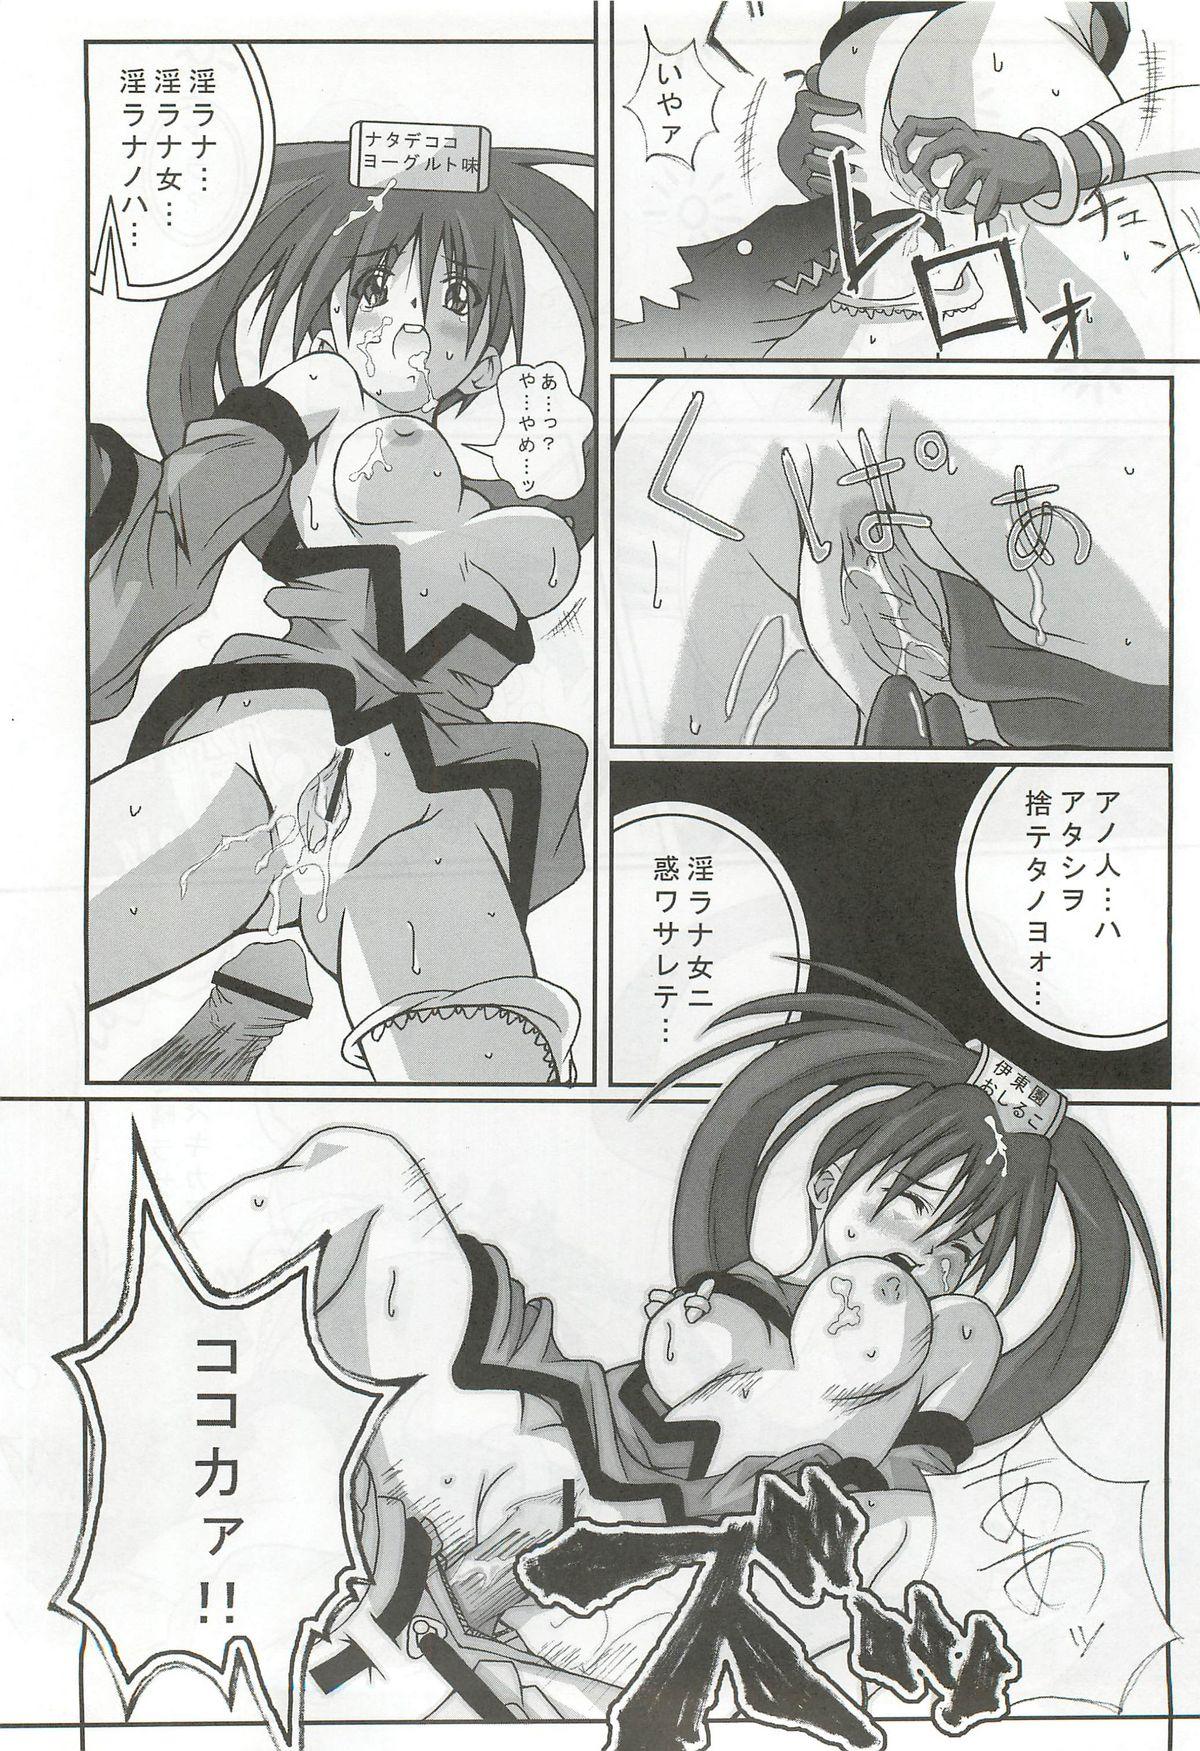 Tanned Passionless 2 - Guilty gear Club - Page 9